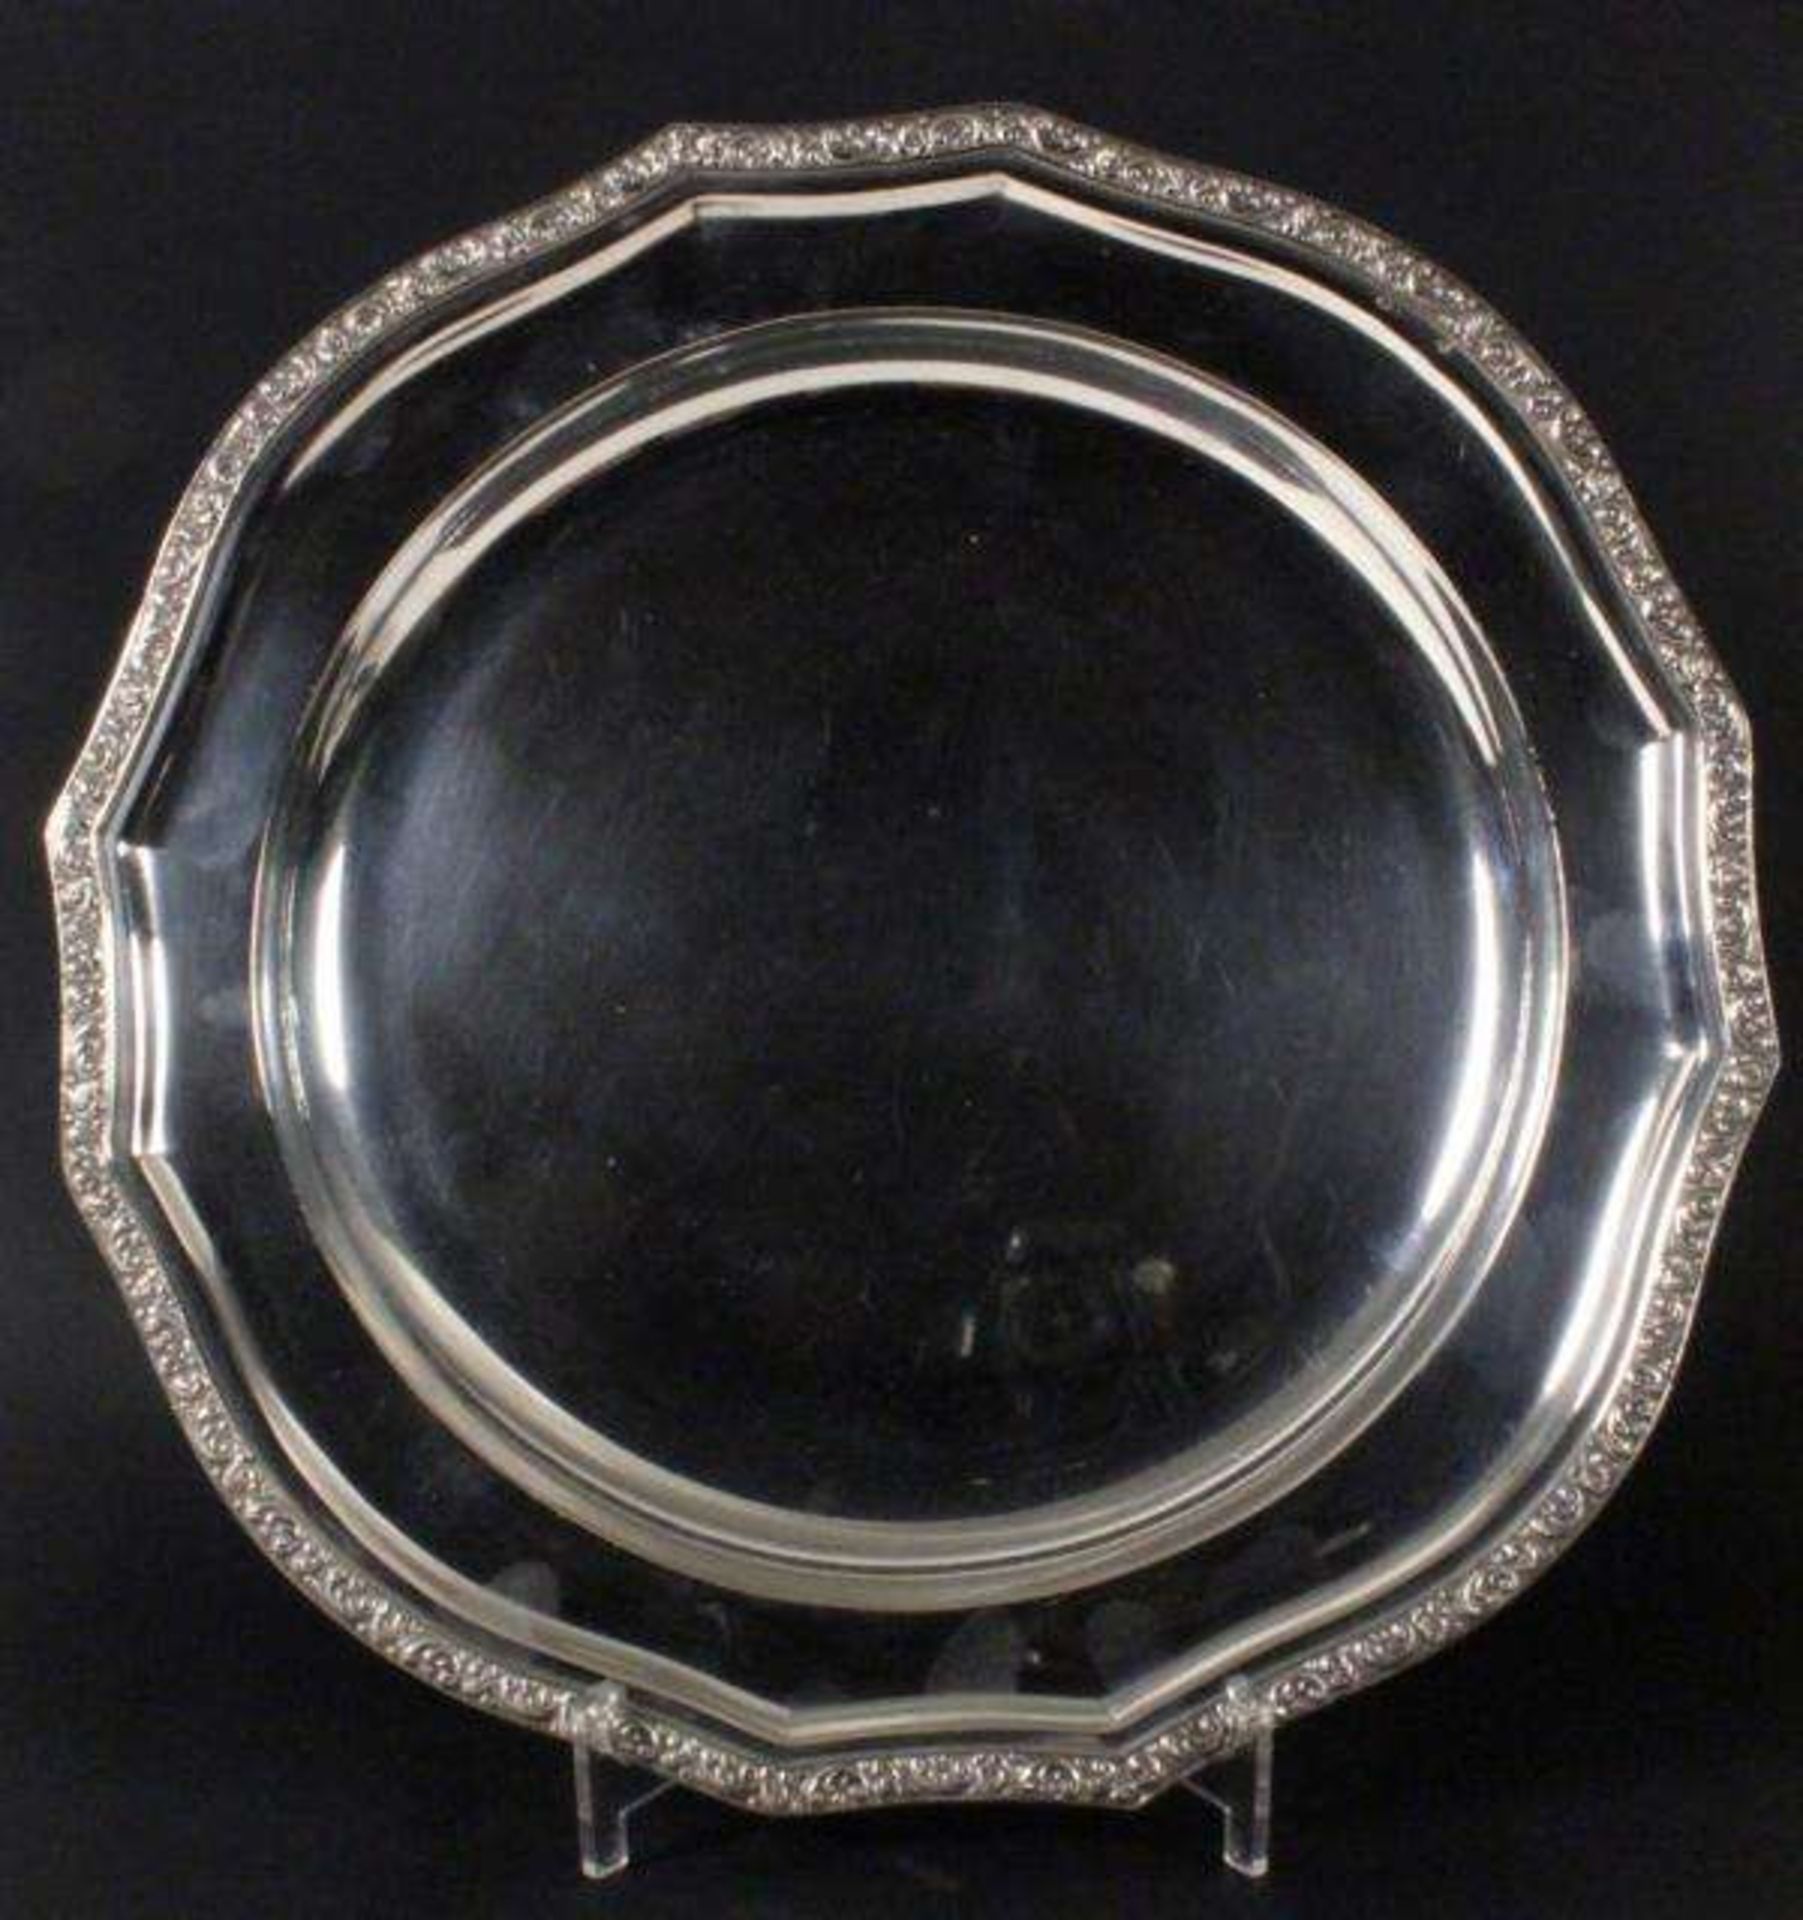 SILVER PLATE Czechoslovakia 1922 - 1929 Silver, round shape with edge furnished with a relief,